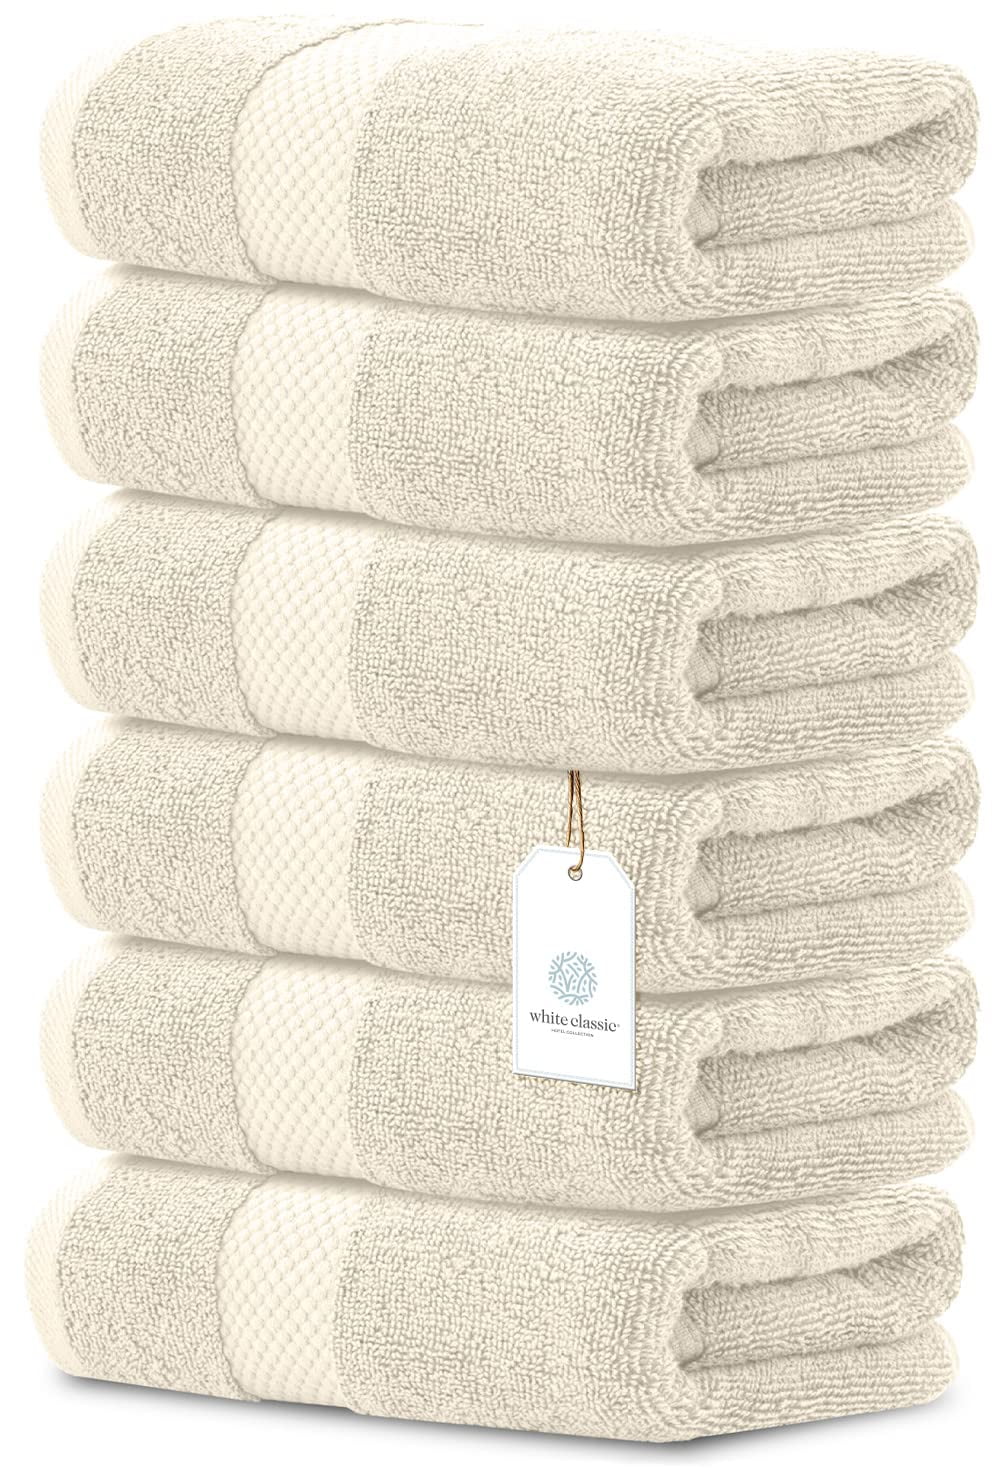  COTTON CRAFT Ultra Soft 6 Pack Hand Towels 16x28 White Weighs 6  Ounces Each - 100% Pure Ringspun Cotton - Luxurious Rayon Trim - Ideal for  Everyday use - Easy Care Machine wash : Home & Kitchen